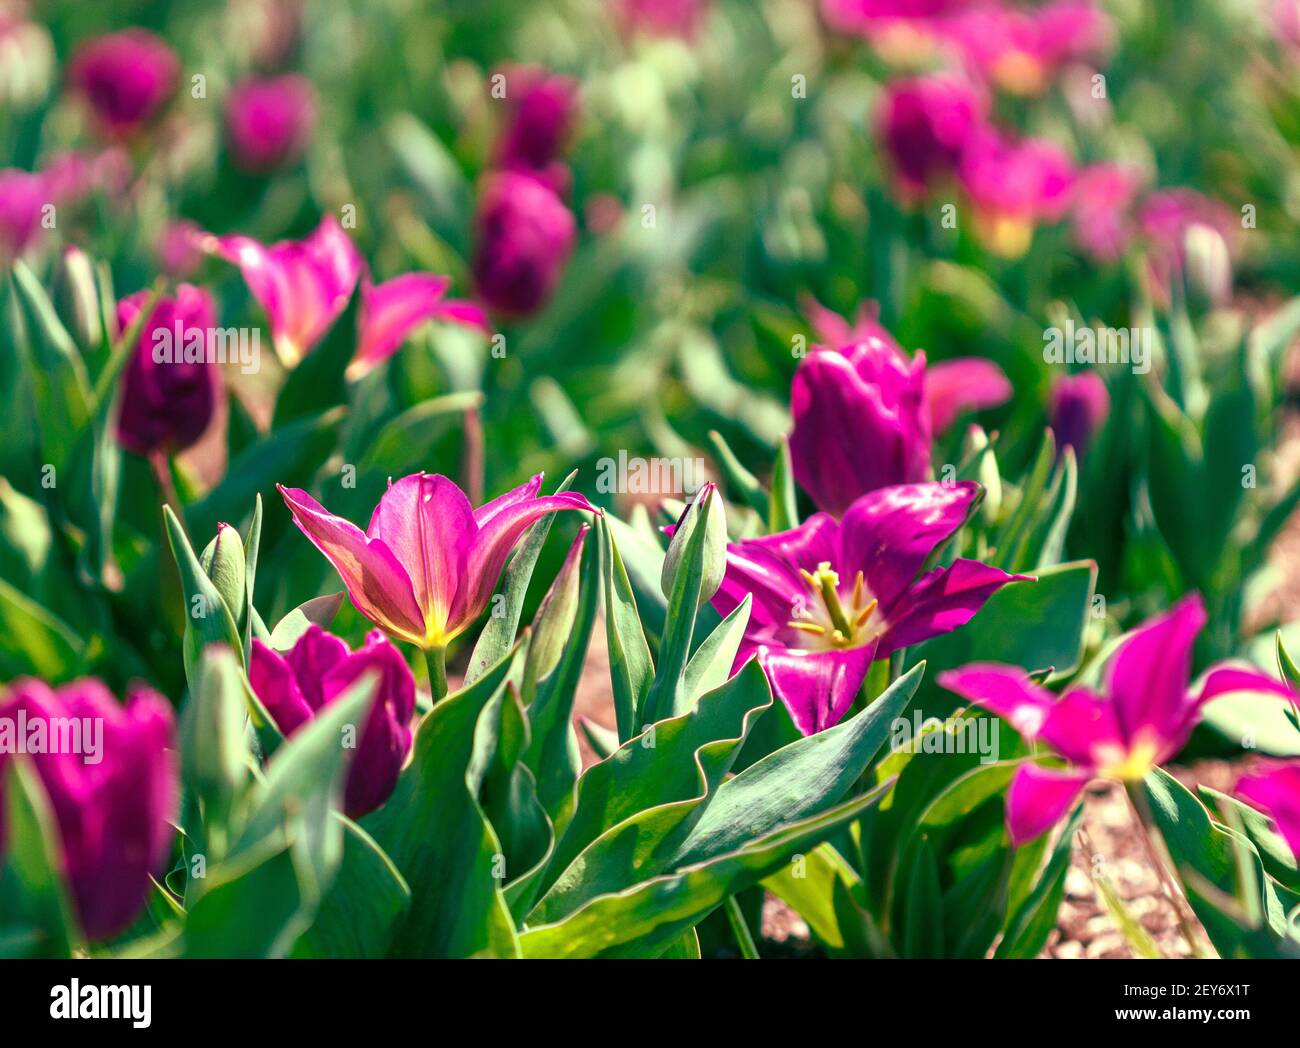 Tulips (Tulipa) are lit by the afternoon sun in the Walled Garden at the Biltmore Estate in Asheville, NC, USA Stock Photo